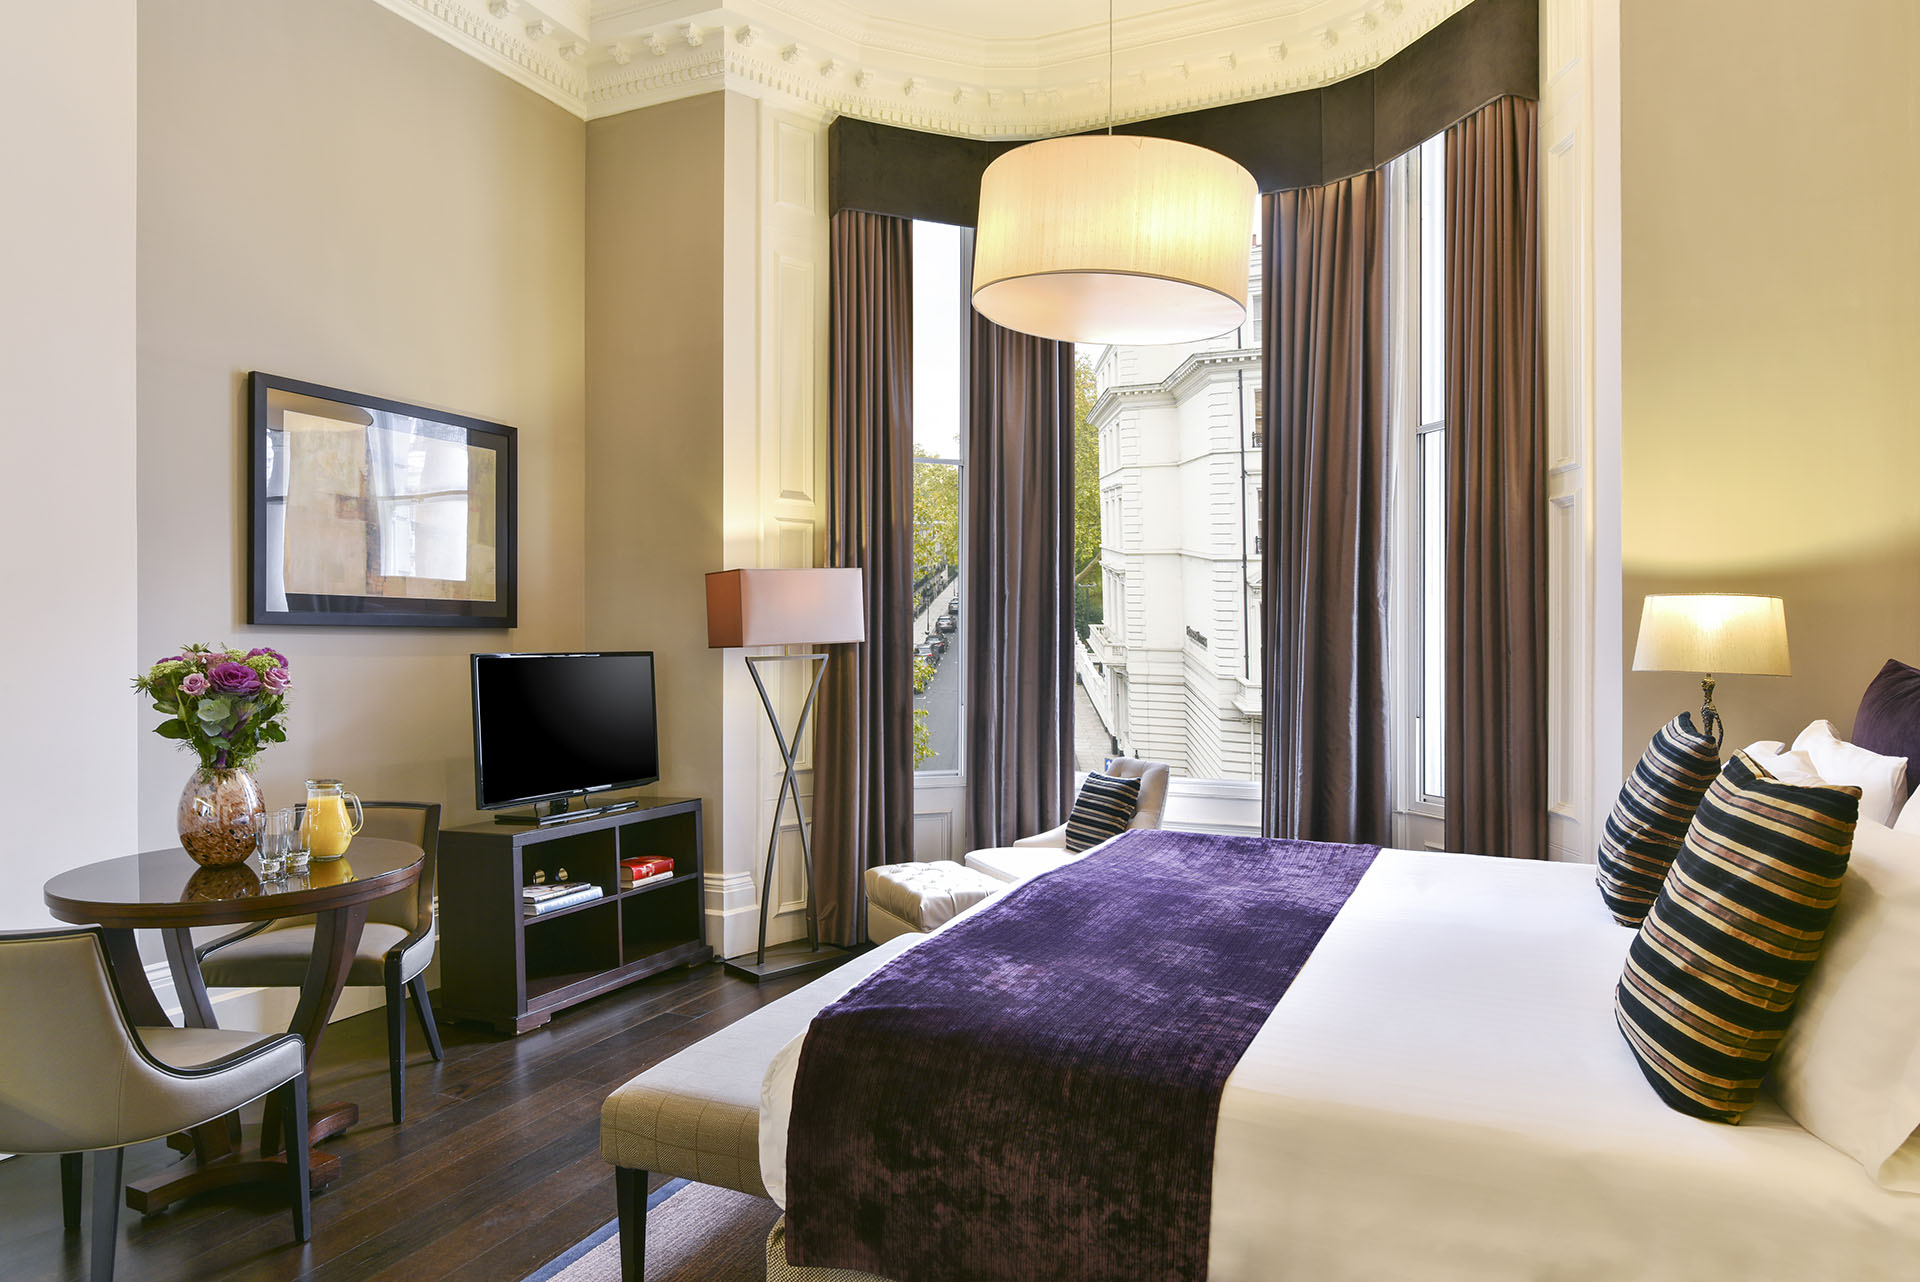 Accommodation of apartment hotel in London for short stay in Kensington